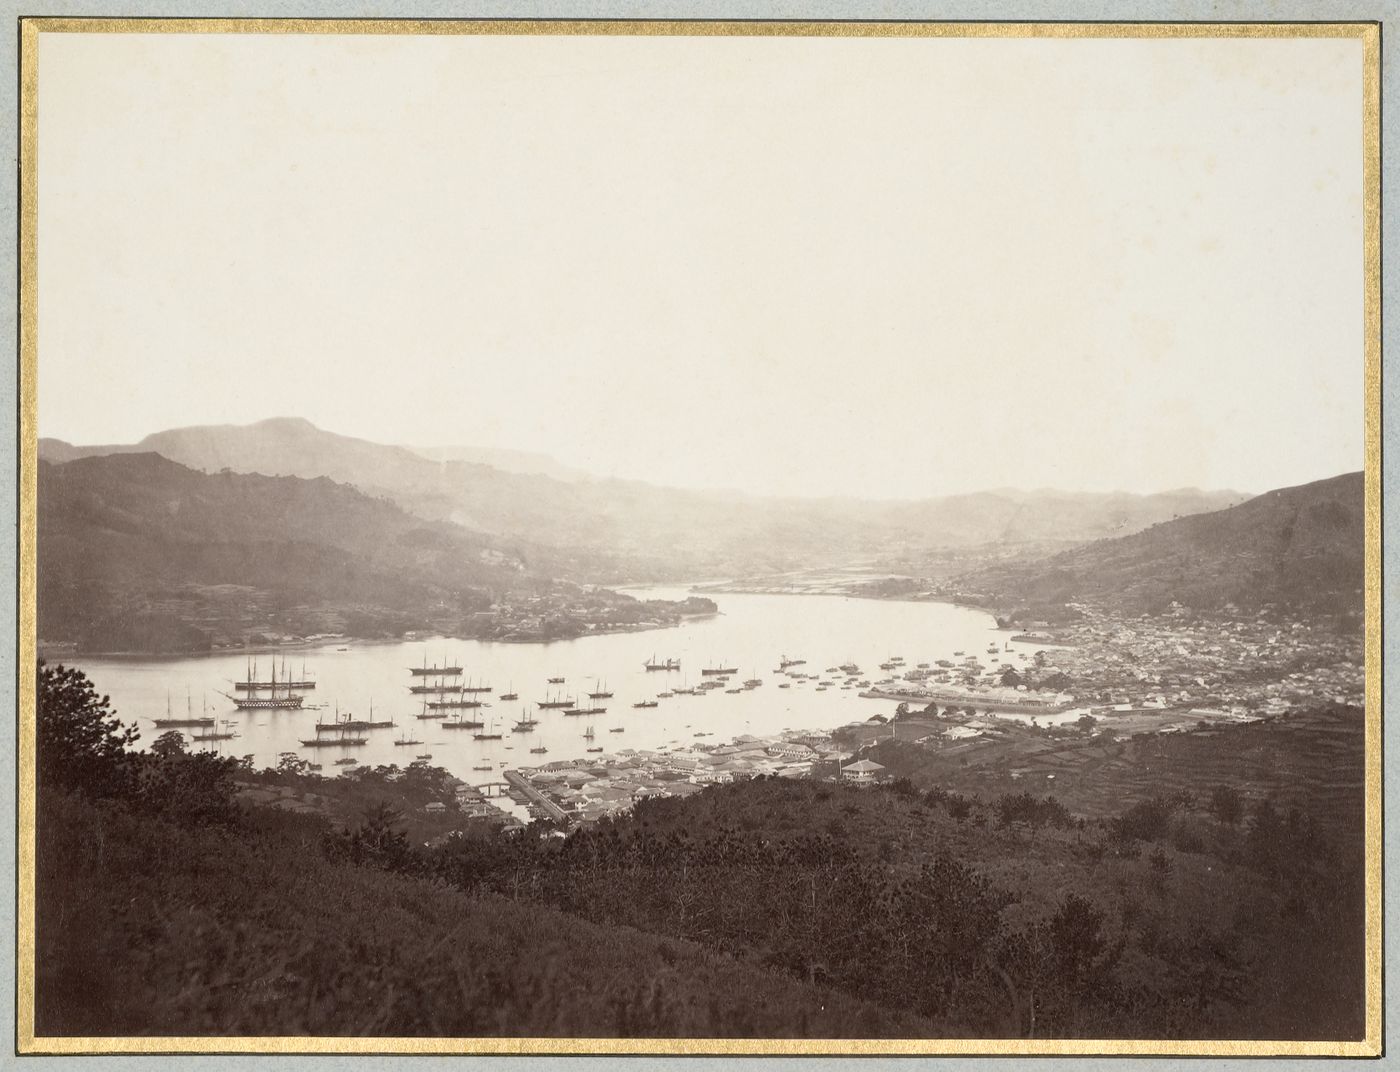 Panoramic view of the harbour and city, showing the foreign settlements of Oura-machi and Deshima, Nagasaki, Japan